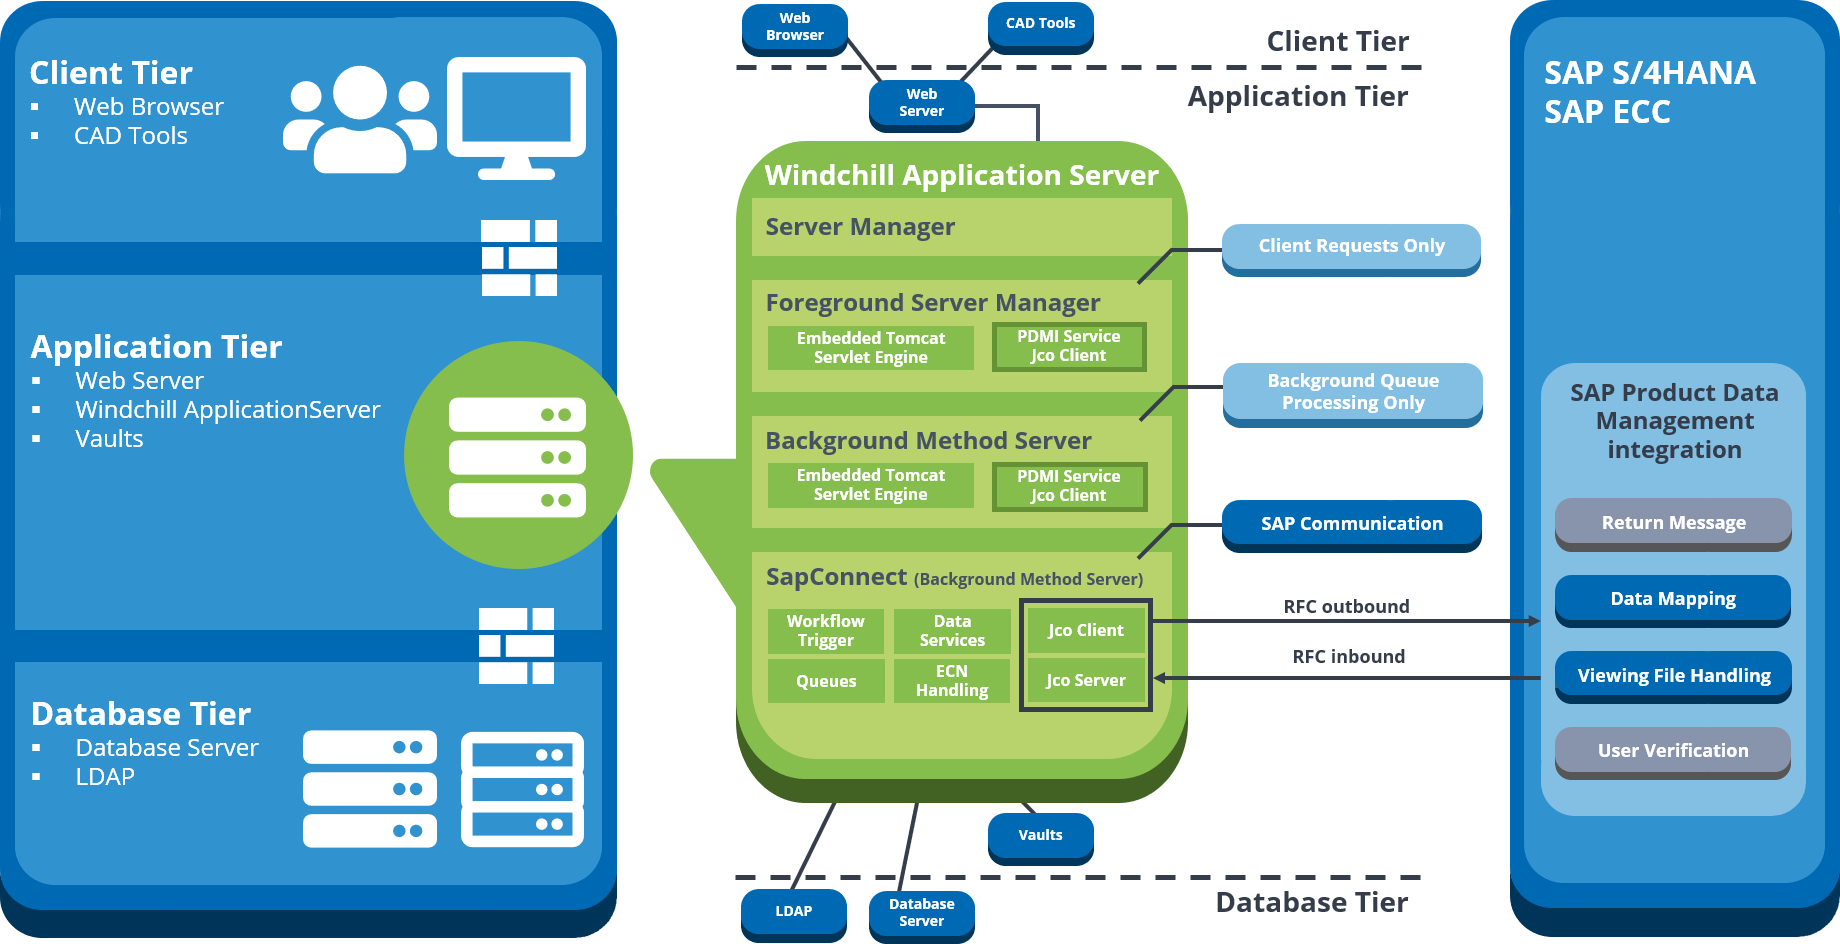 Architecture diagram of the SAP product data management integration to PTC Windchill